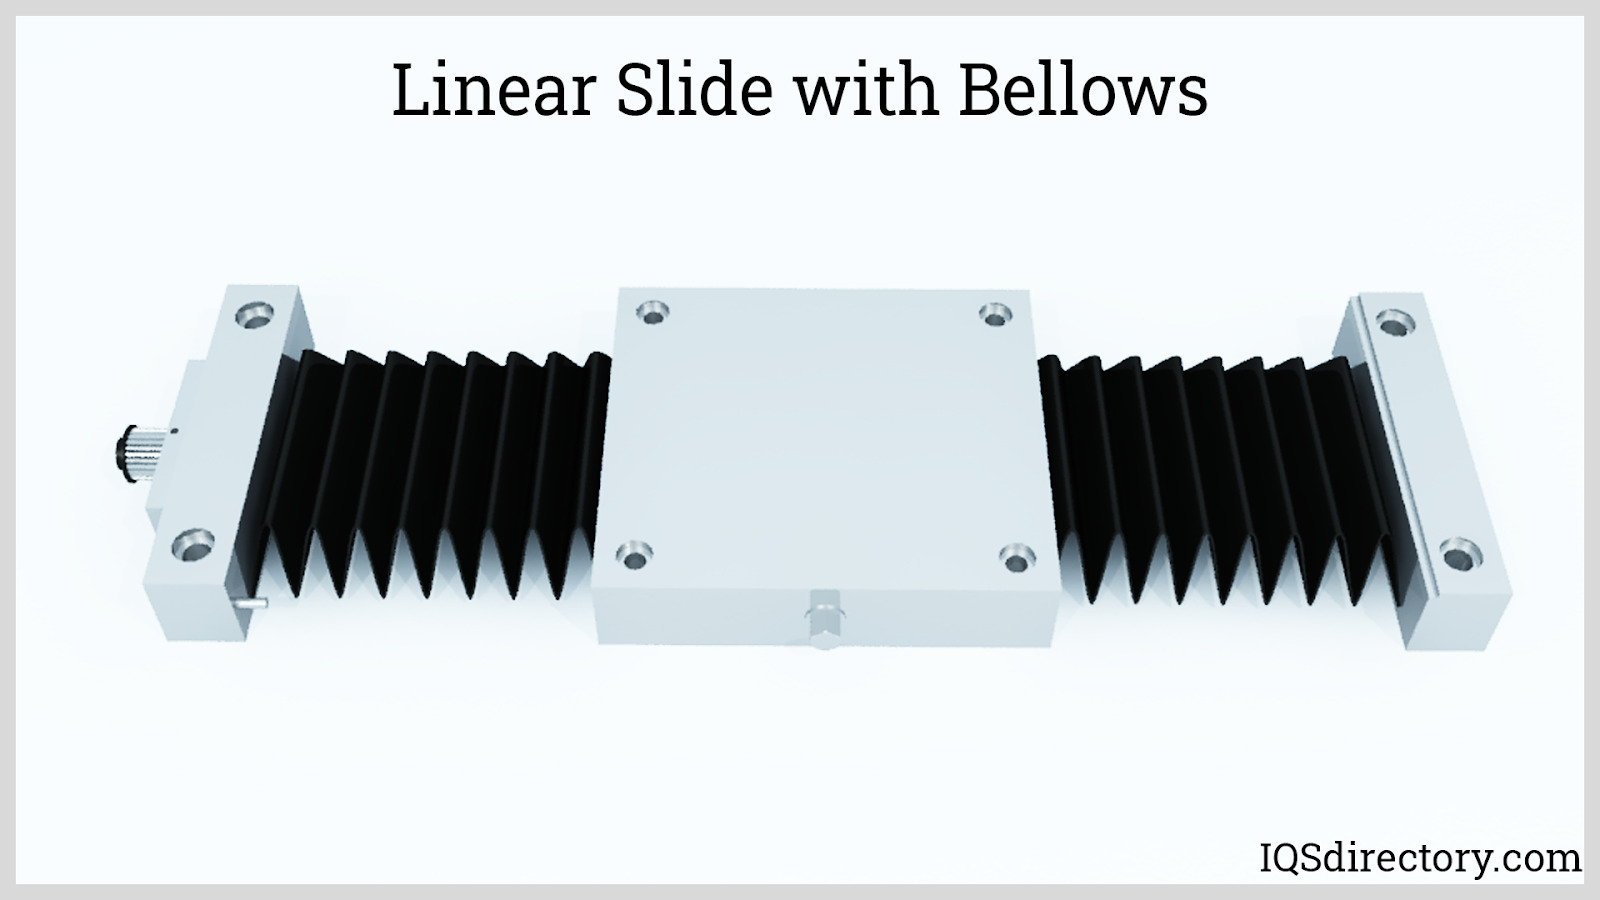 Linear Rails: Types, Applications, Benefits, and Design